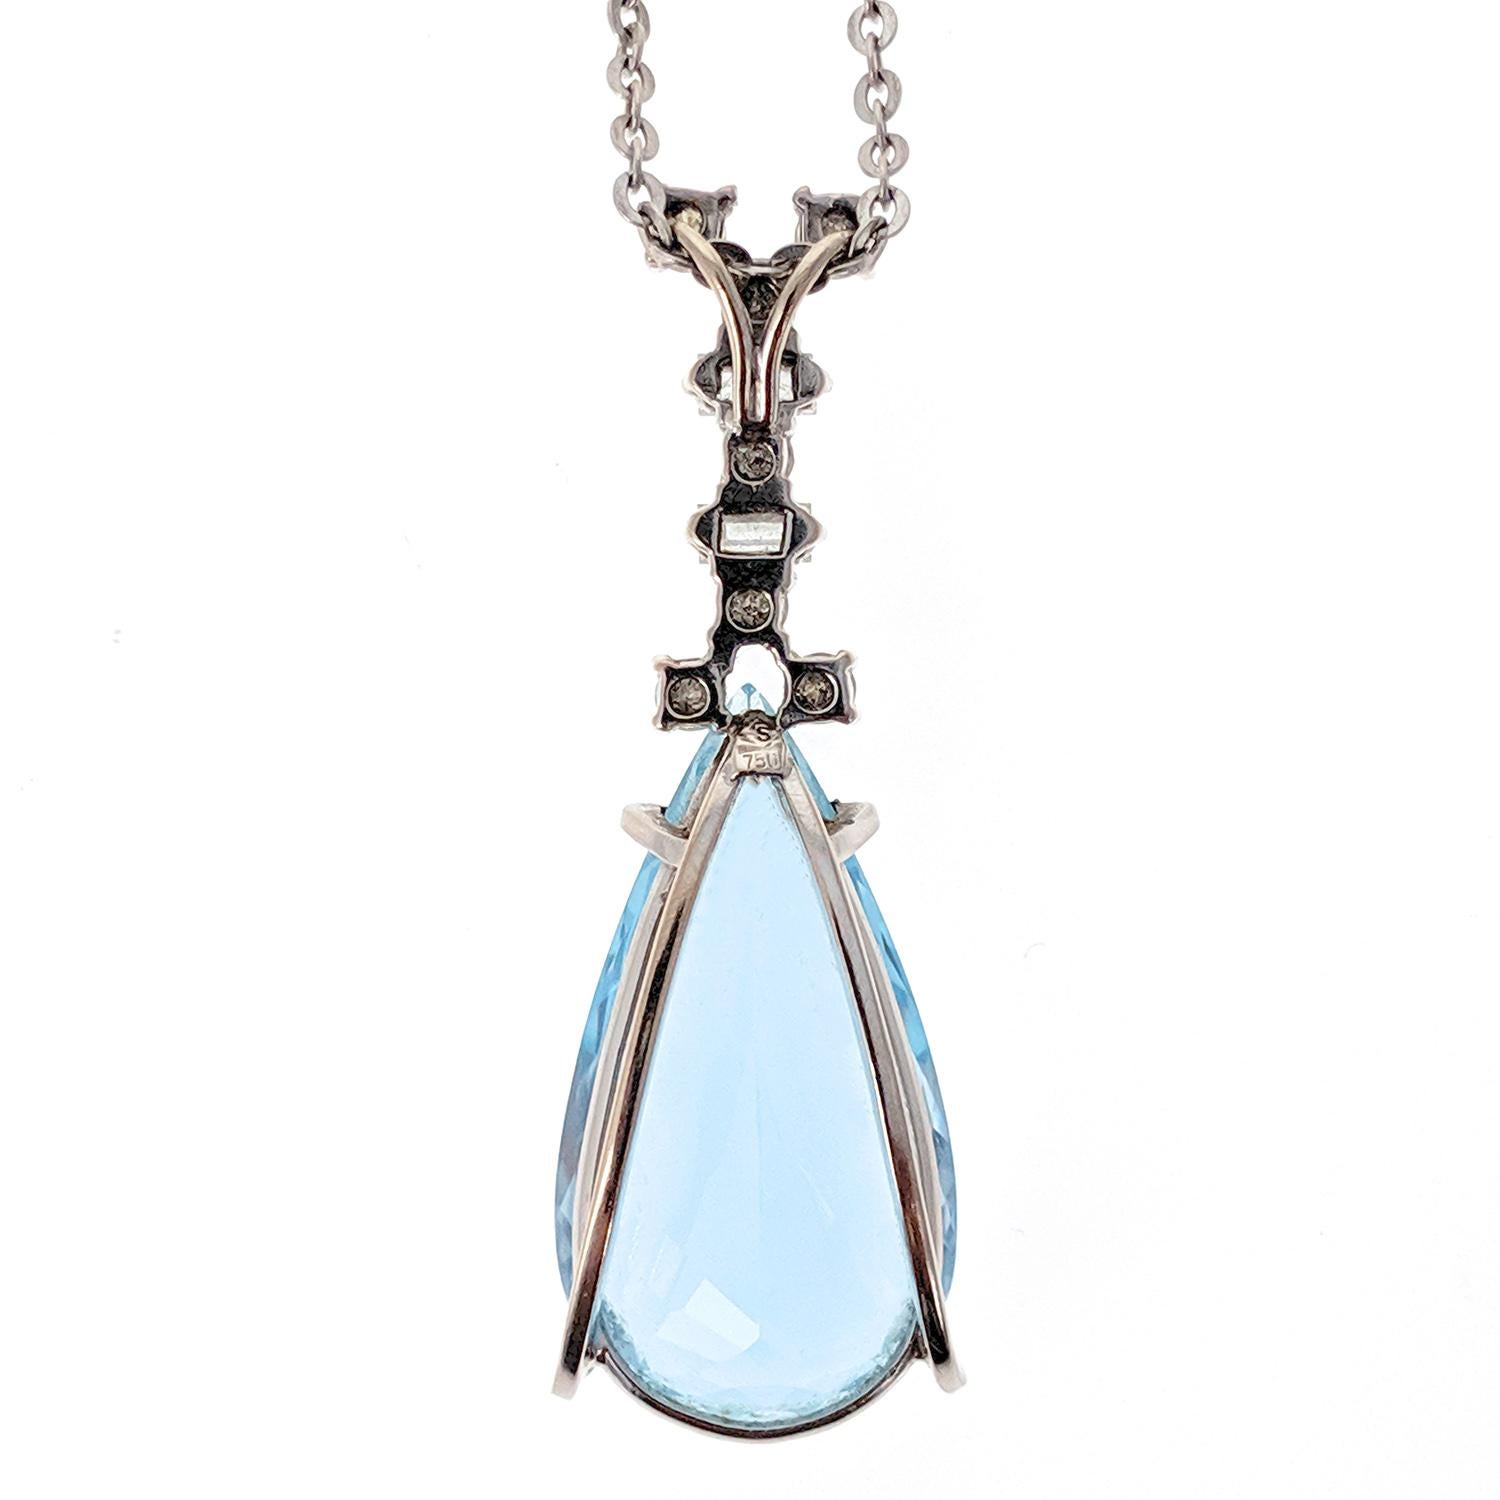 Modern 1960s Aquamarine Pendant Necklace by H. Stern